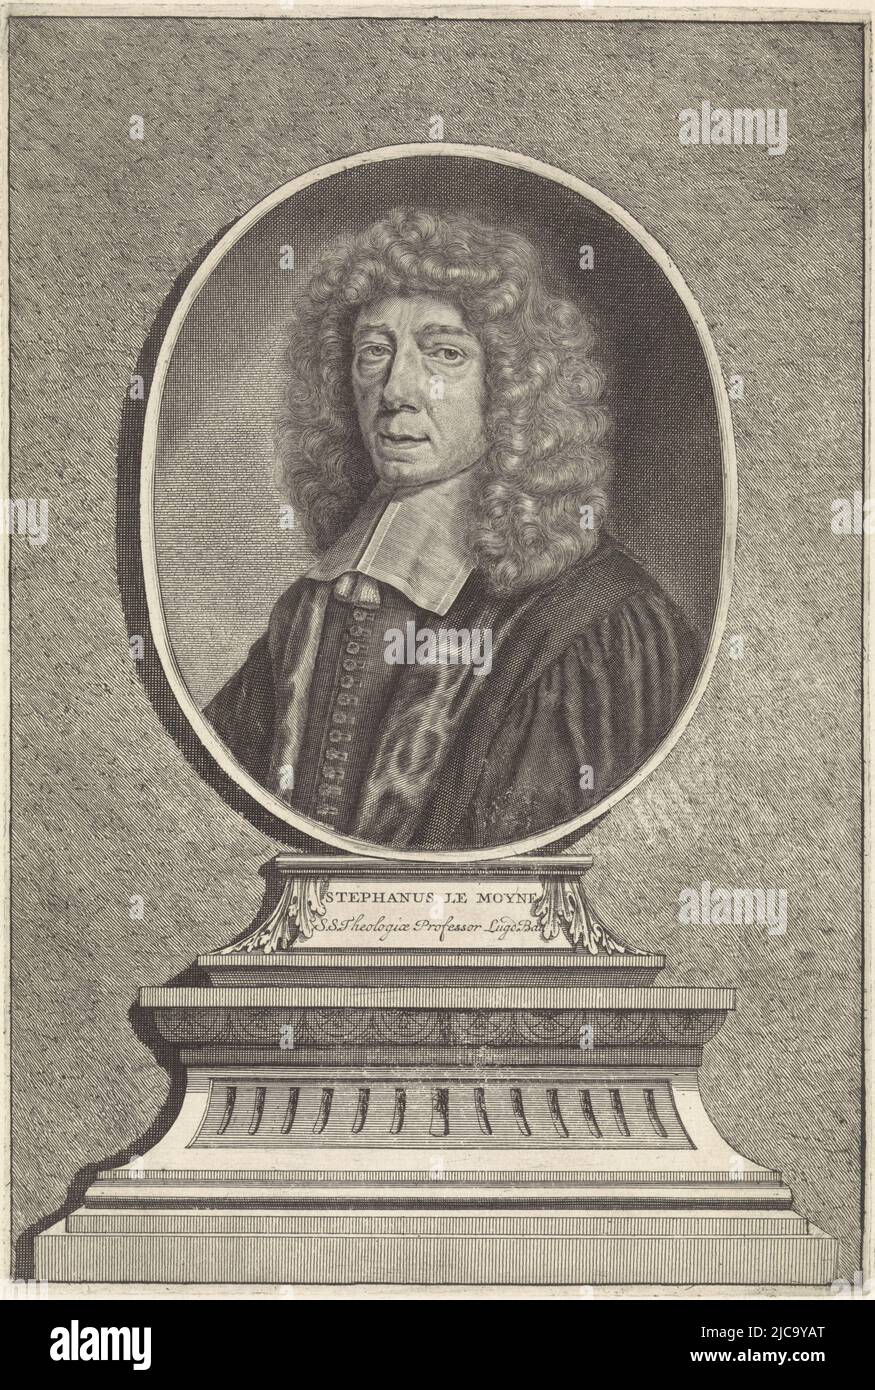 Portrait of Etienne le Moine, professor of theology and pastor in Leiden, on a pied-a-terre, Portrait of Etienne le Moine, print maker: Anthony van Zijlvelt, publisher: Pieter van der Aa (I), print maker: Amsterdam, publisher: Leiden, 1687 - 1691 and/or 1714 - 1720, paper, engraving, etching, h 272 mm × w 182 mm Stock Photo